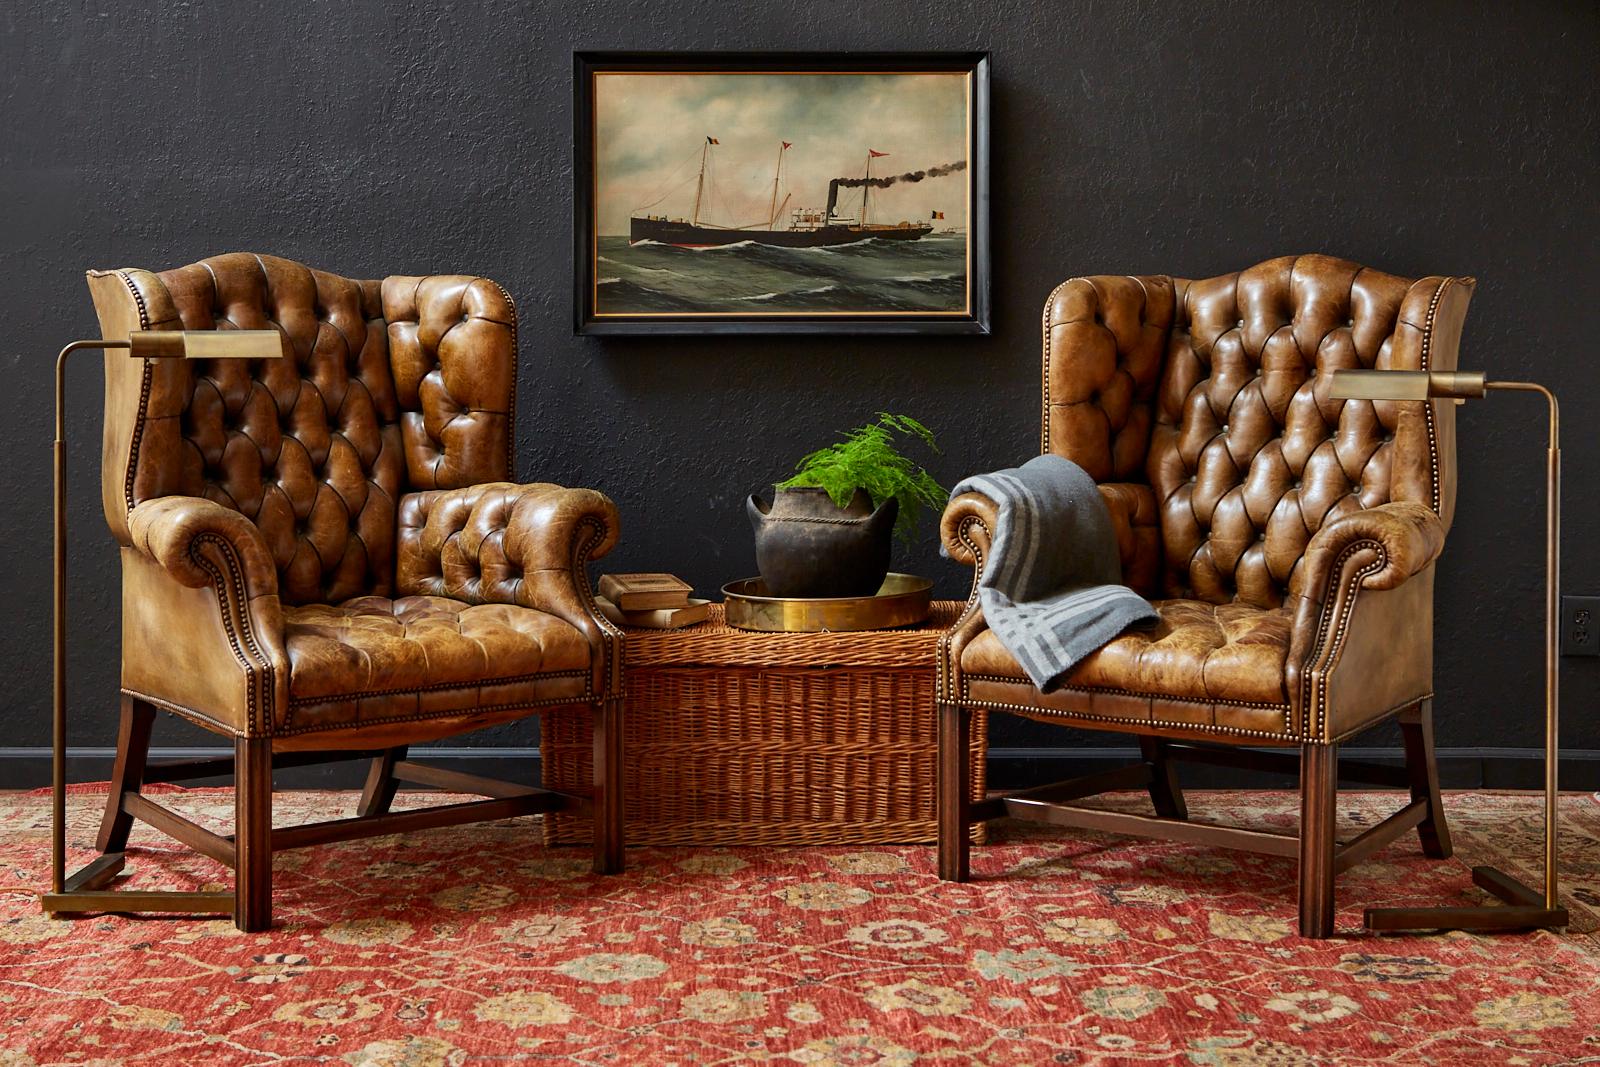 Fine pair of English wing chairs or library chairs featuring an aged cigar leather tufted upholstery. The wingbacks have a mahogany hourglass frame made in the George III taste with fully developed wings and straight, square legs in front. Crafted